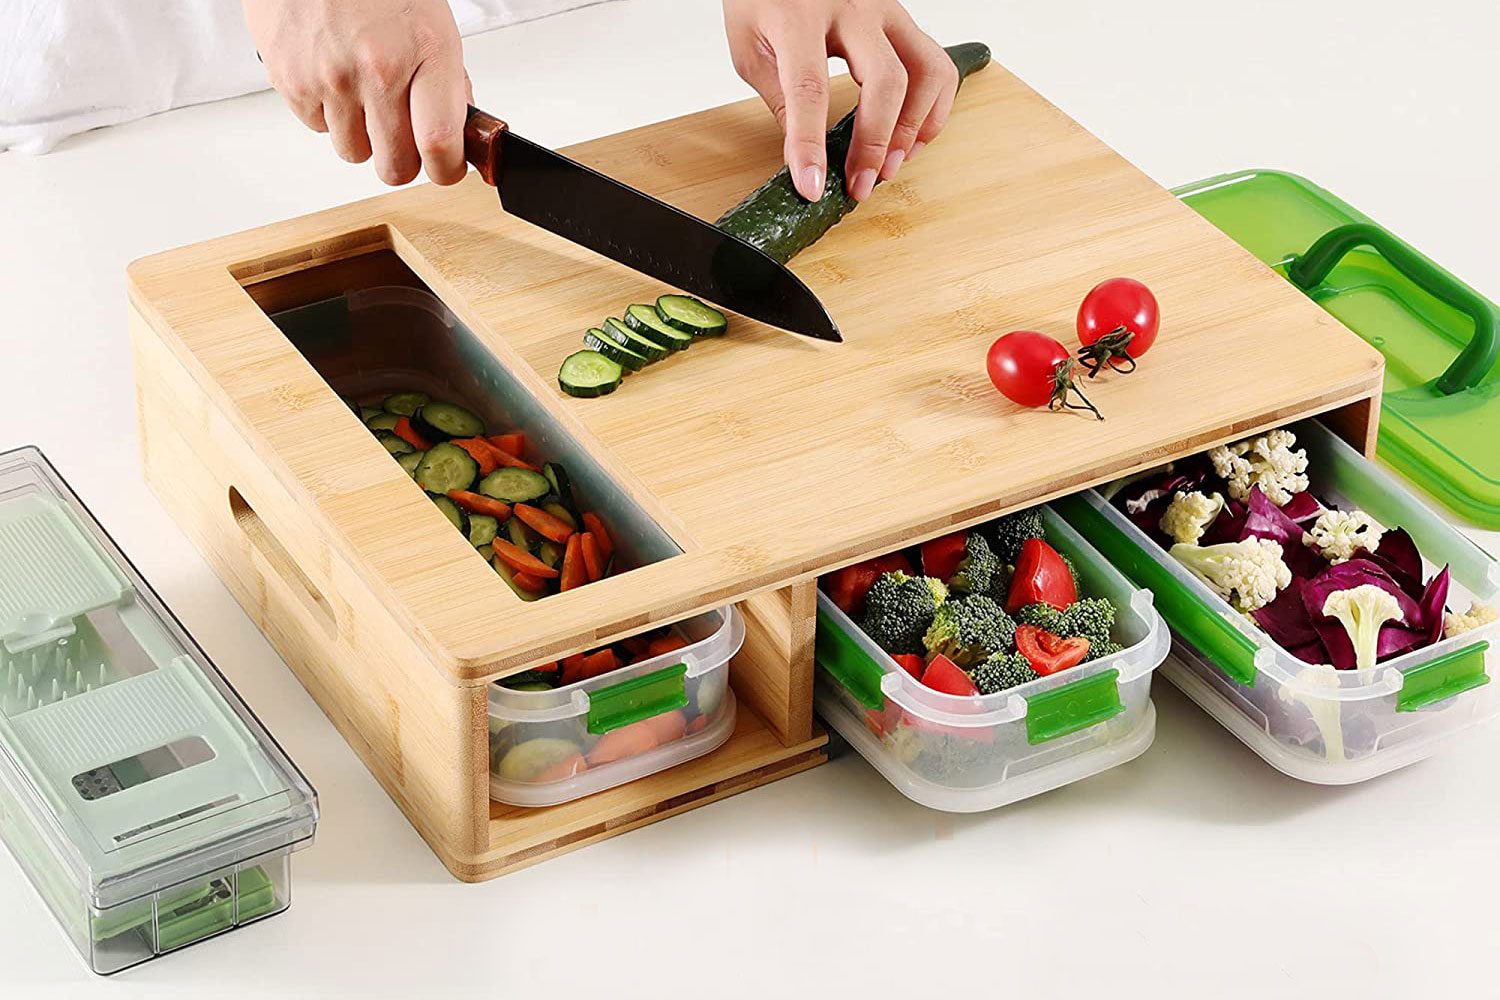 Gourmet Food with Bamboo Cutting Board Gift Set